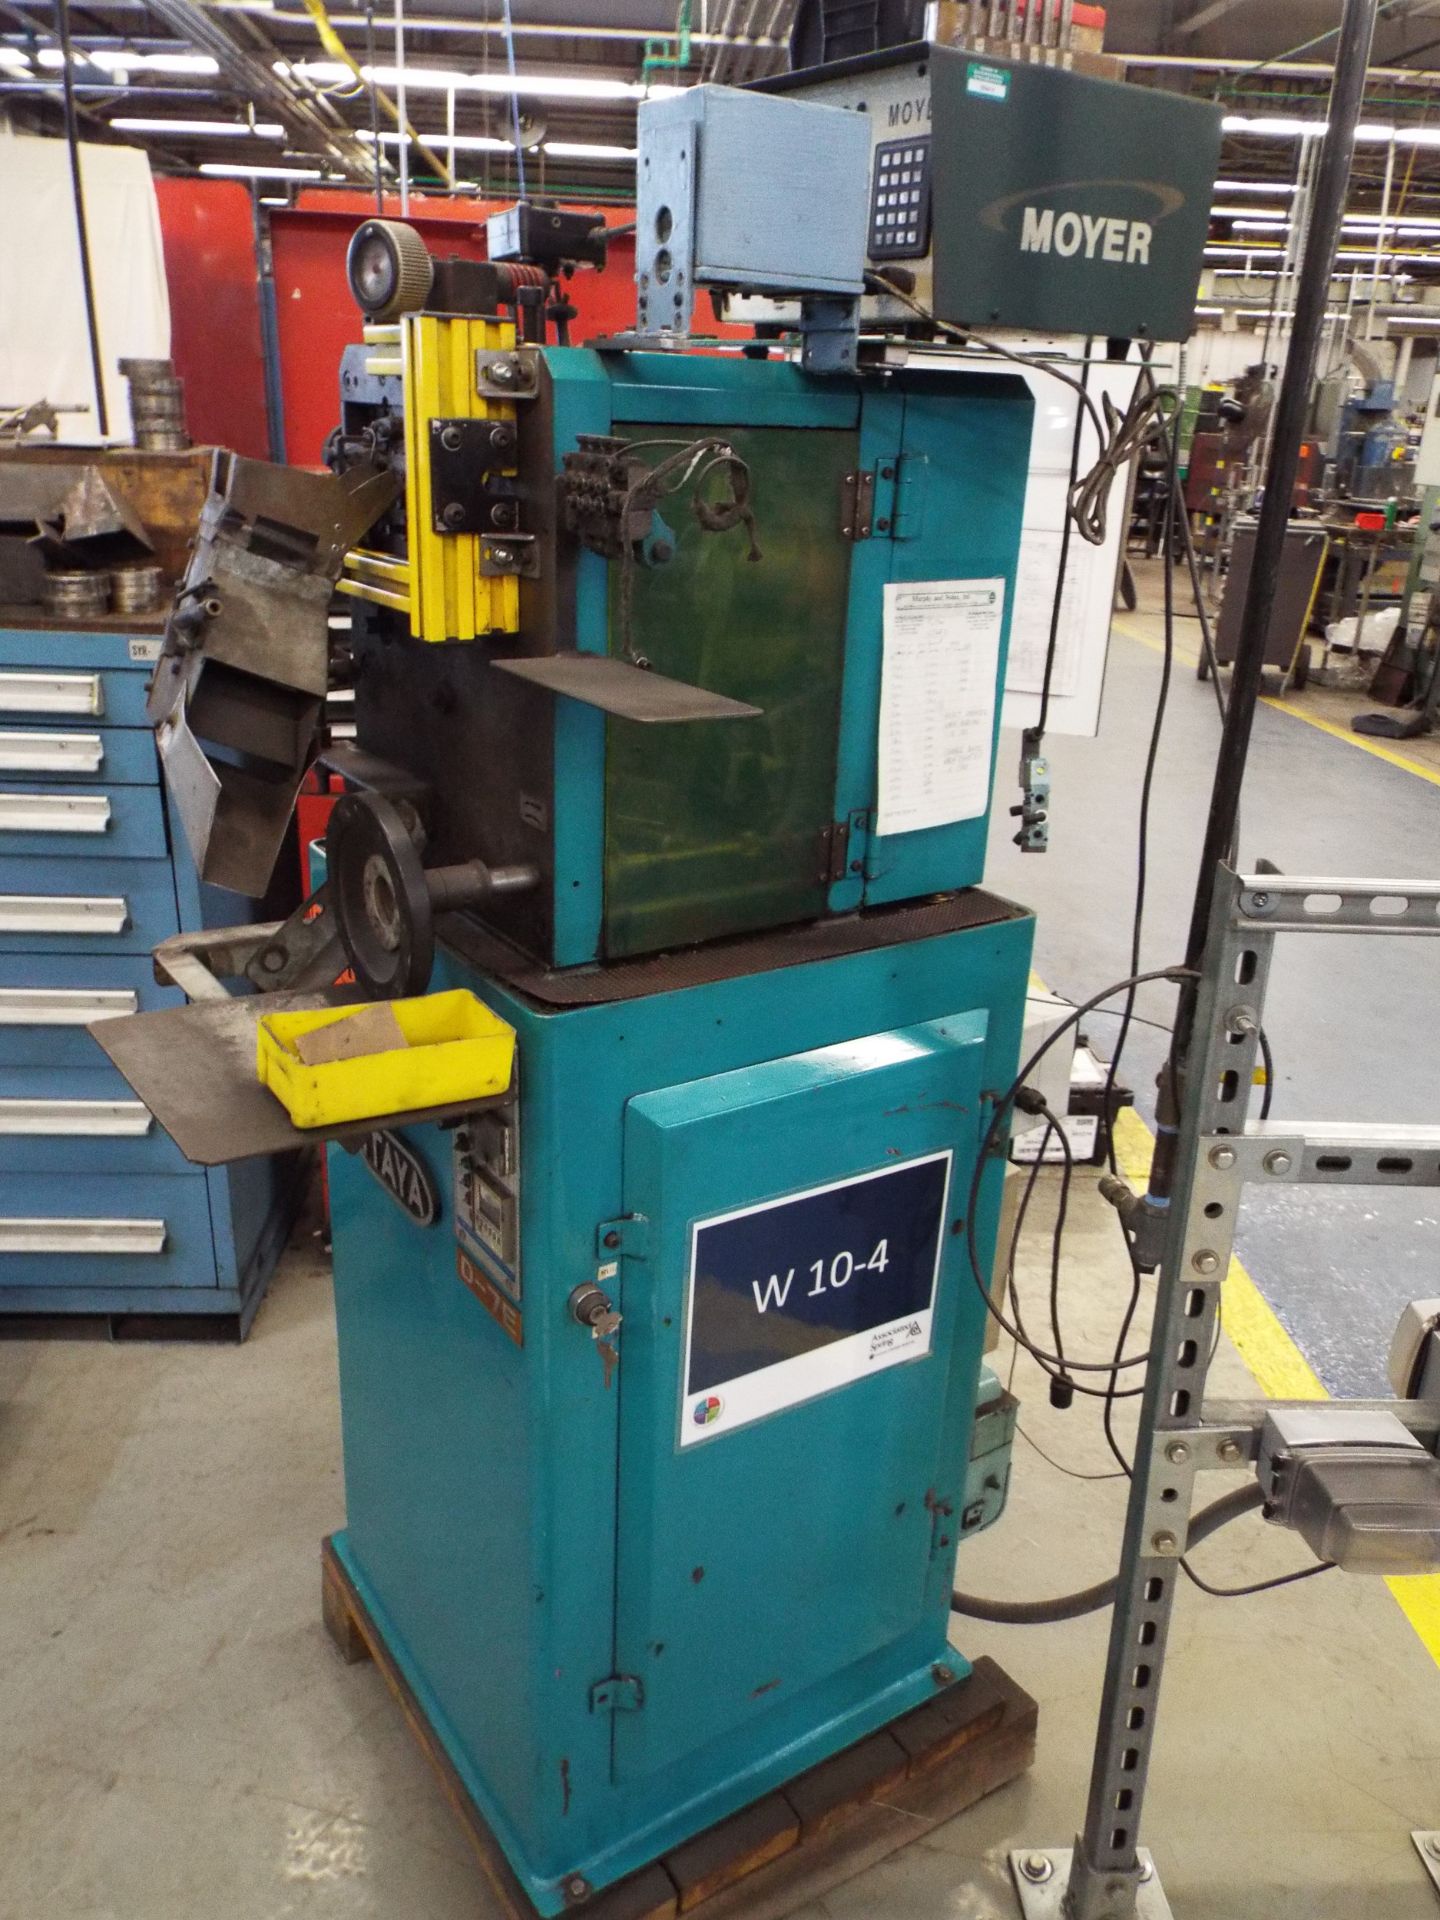 ITAYA D-7E SPRING COILING MACHINE WITH MOYER MERLIN DIGITAL SPRING GAUGE, S/N 5157 (CI) - Image 4 of 5